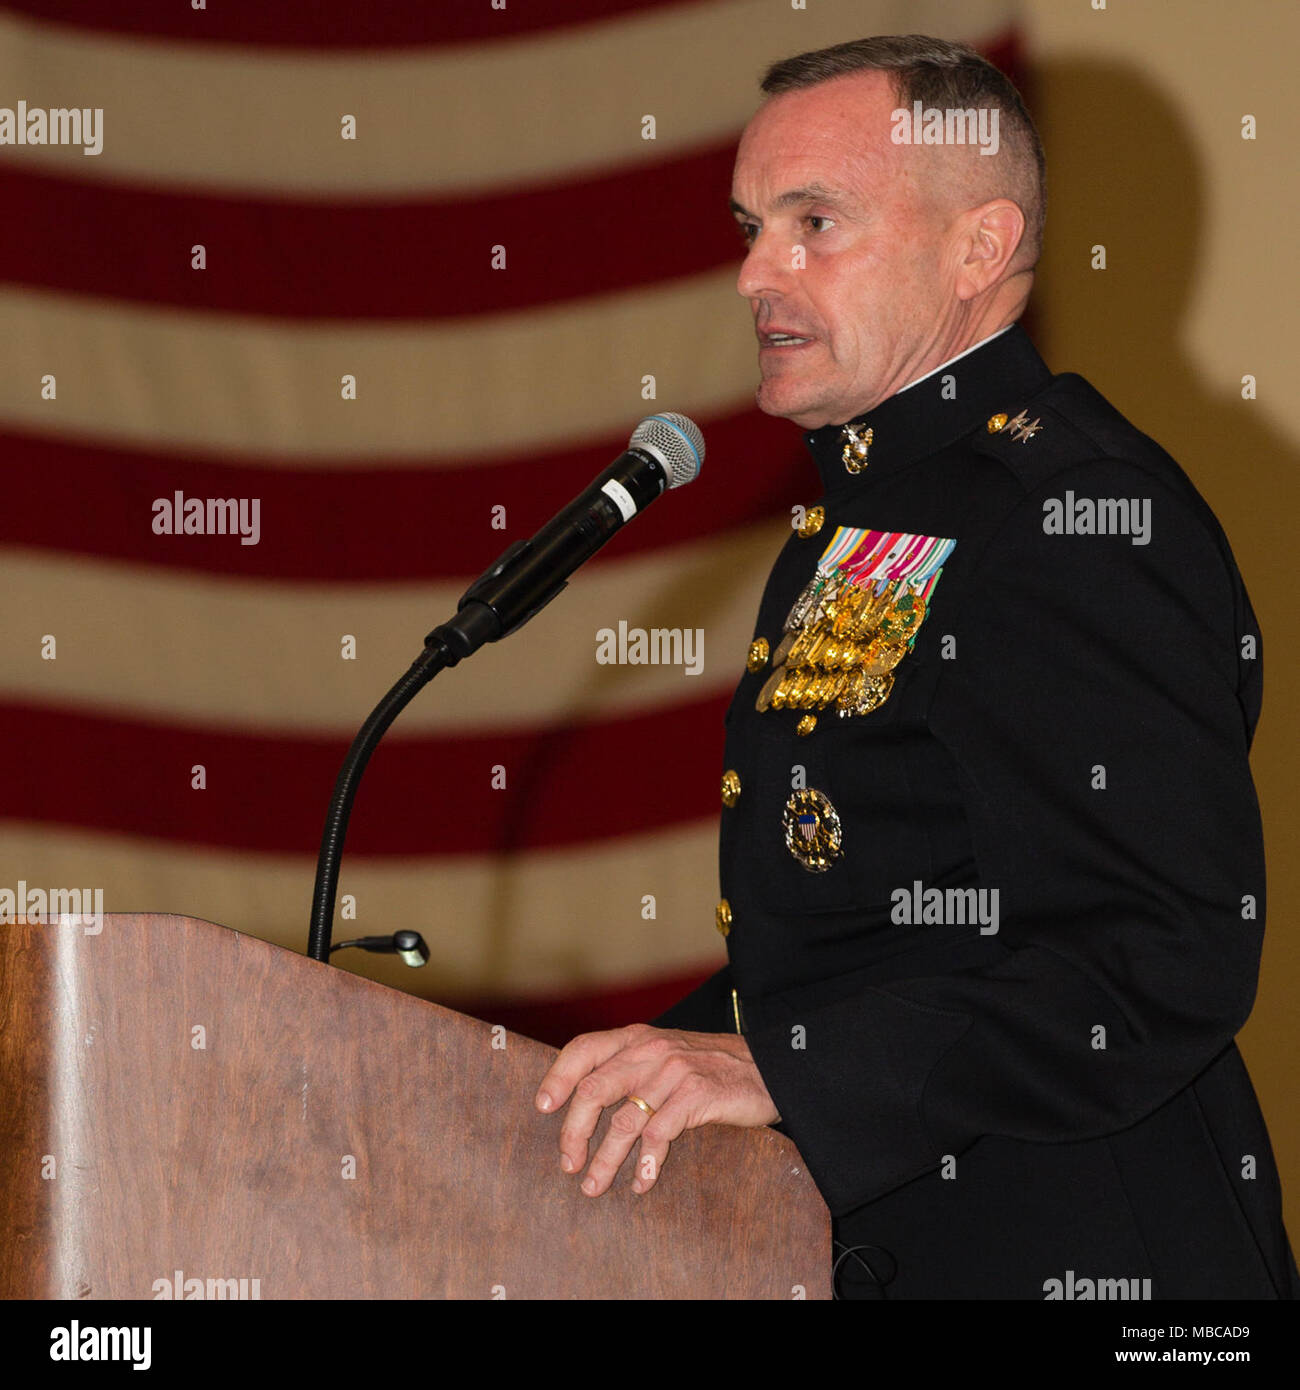 U.S. Marine Corps Maj. Gen. Vincent Coglianese, Commander, Marine Corps Installations Command speaks at the 73rd Anniversary of the Battle of Iwo Jima at the Marine Corps Base Camp Pendleton, Calif., Feb. 17, 2018. The evening included a sunset memorial, 21-gun salute and banquet. (U.S. Marine Corps Stock Photo